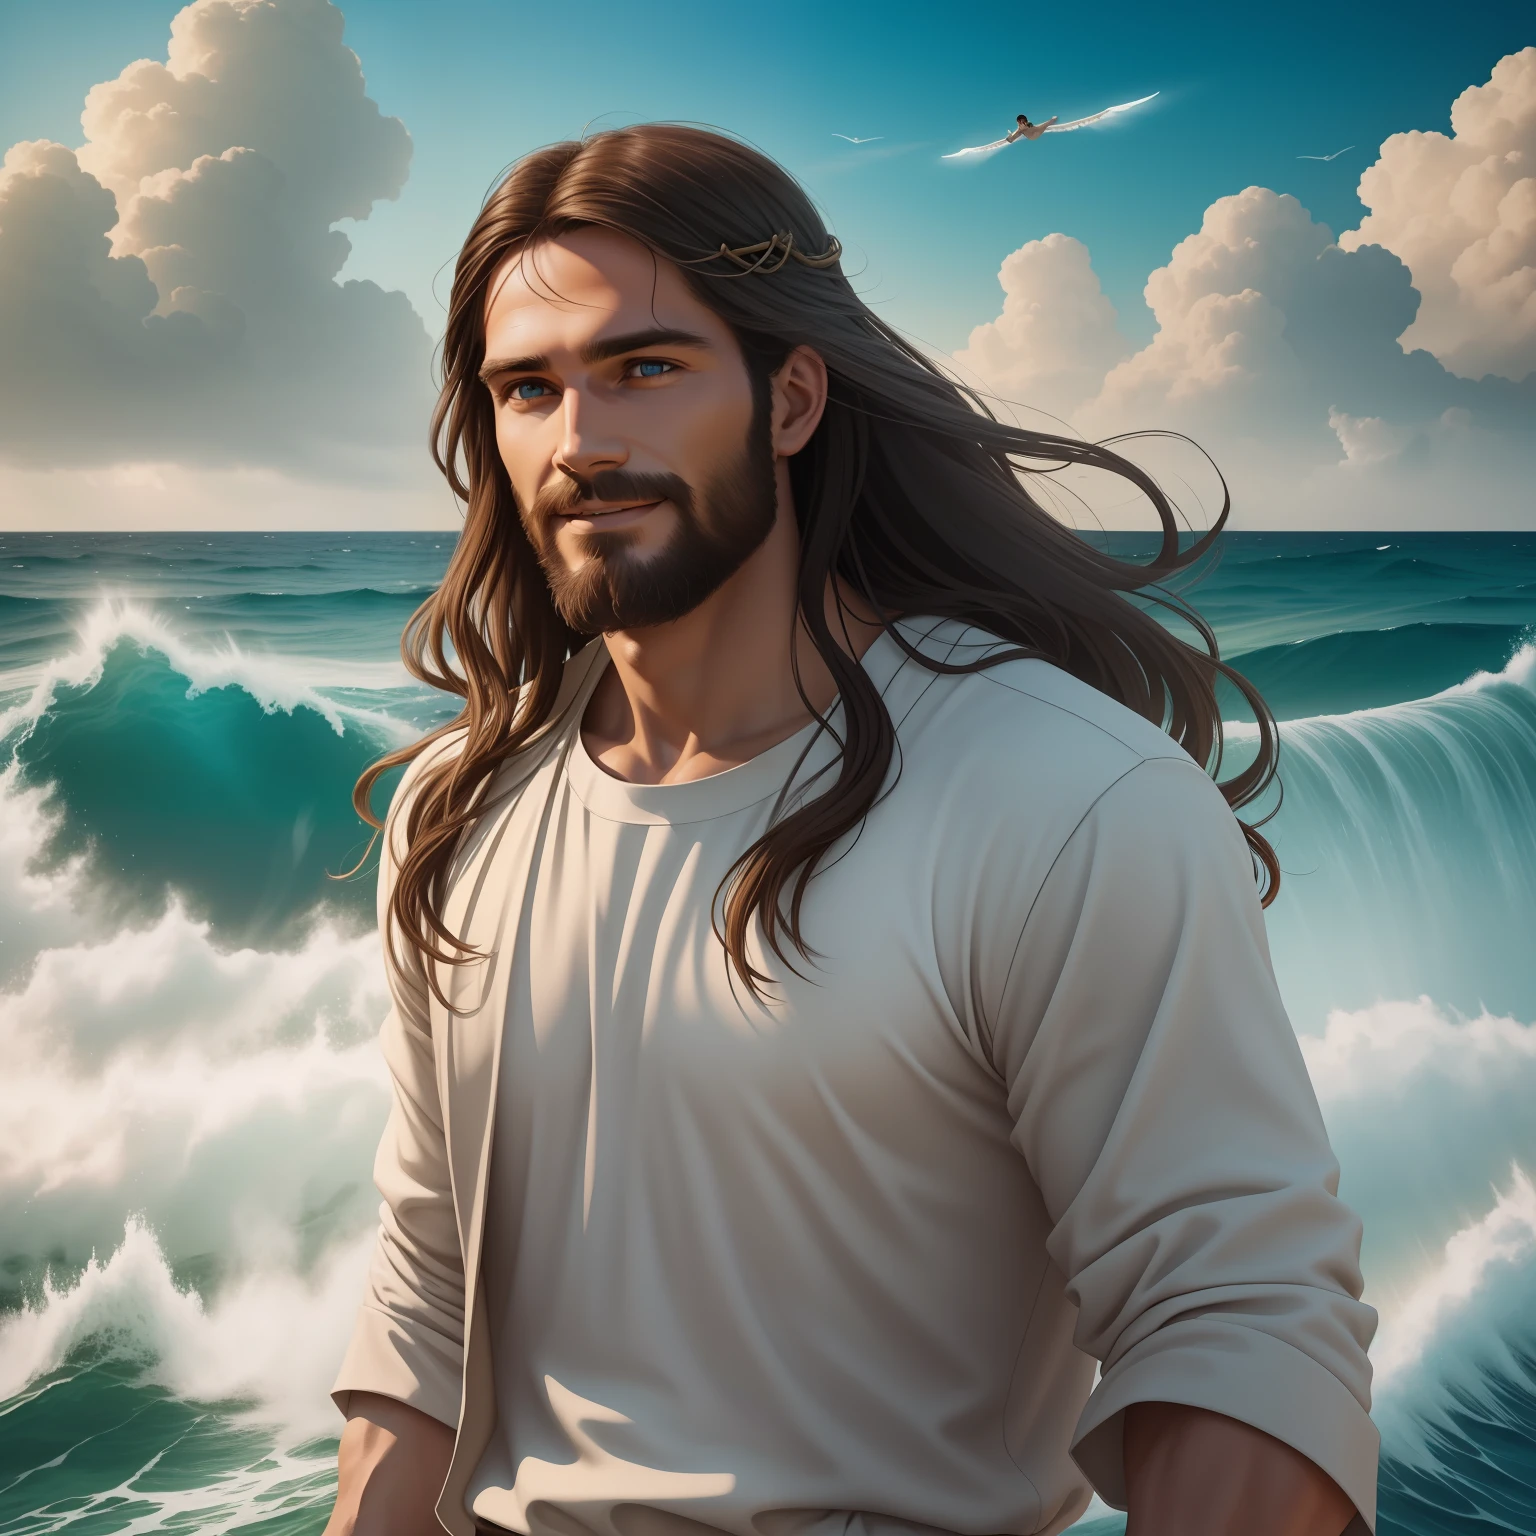 Real Jesus flying on sky with a flying cloud in the background, Jesus walking on water, biblical illustration, epic biblical representation, forcing him to flee, coming out of the ocean, ! holding in hand!, disembarking, god of the ocean, beautiful representation, 8k 3D Model, realistic, cross
a 3D Realistic of jesus with a halo in the sky, jesus christ, smiling in heaven, portrait of jesus christ, jesus face, 35 young almighty god, portrait of a heavenly god, greg olsen, gigachad jesus, jesus of nazareth, jesus, the face of god, god looking at me, he is greeting you warmly, he is happy, avatar image